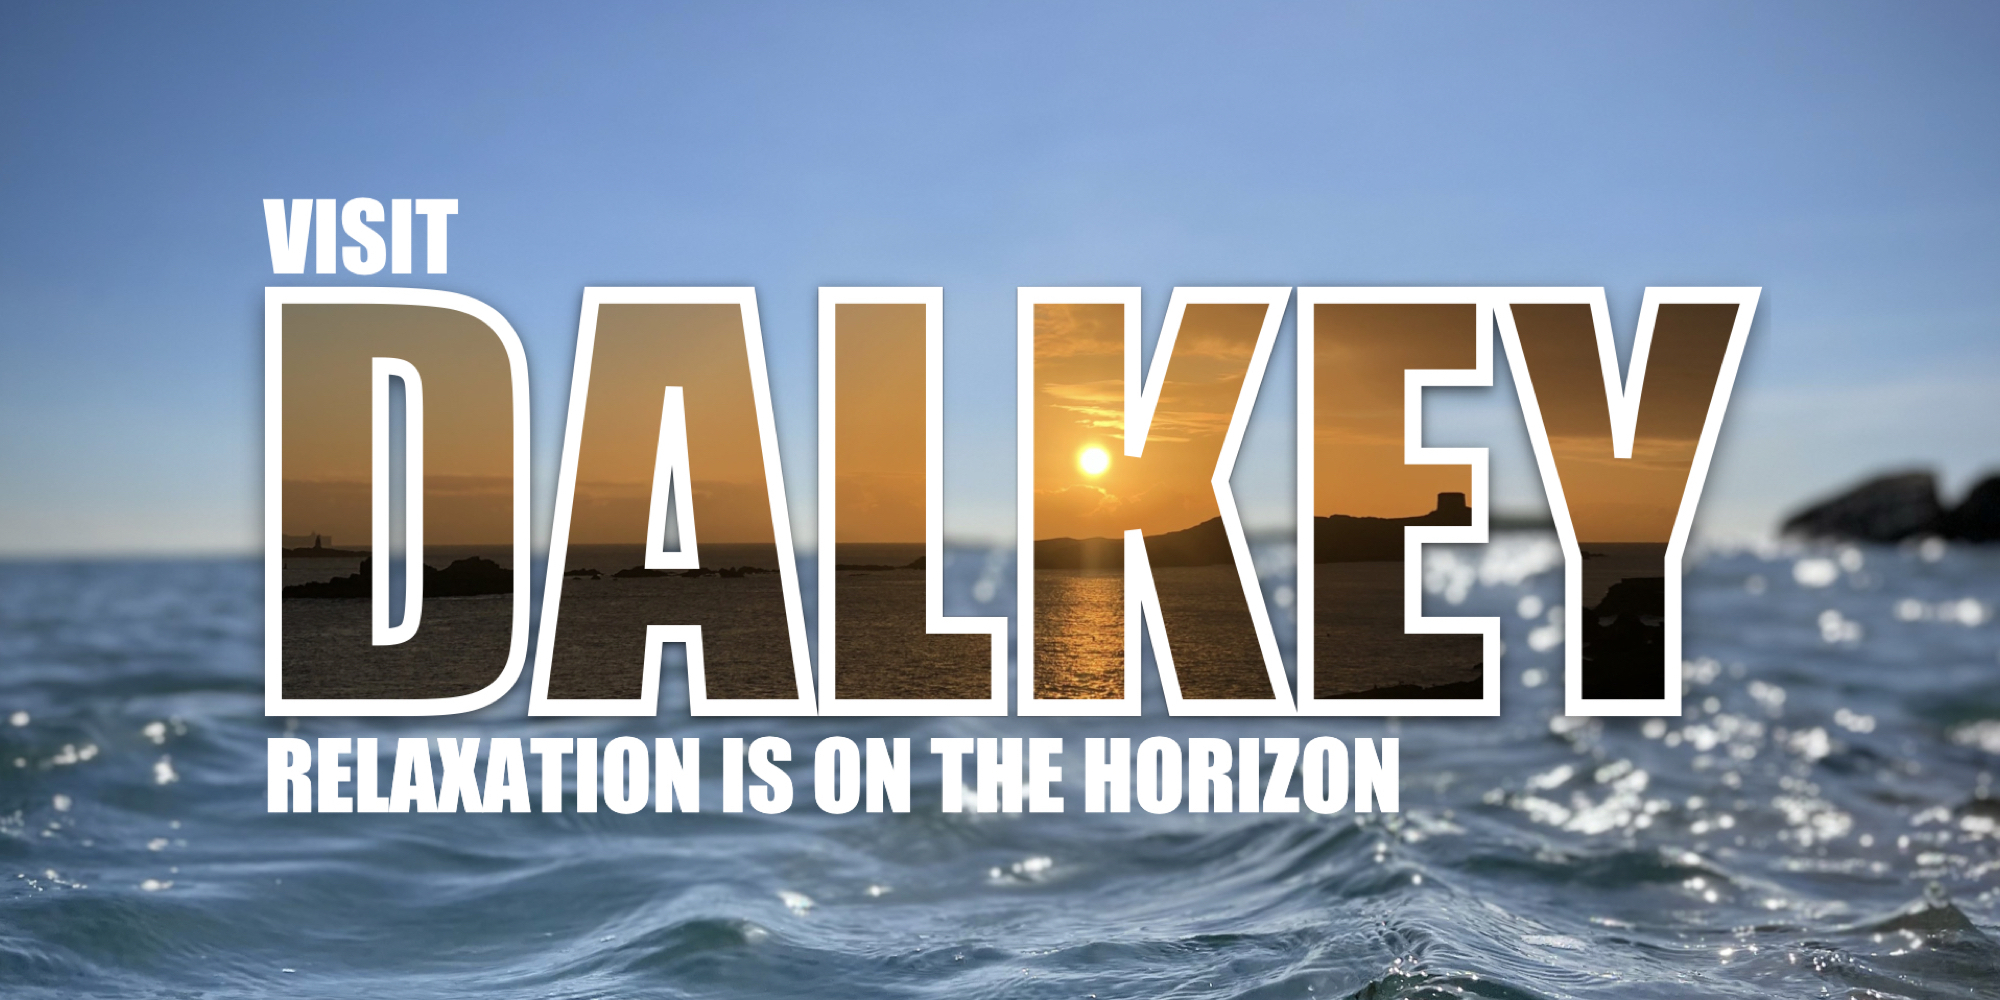 Large graphic text reading ‘Visit Dalkey. Relaxation is on the Horizon’, with a background showing the ocean, horizon & sky.